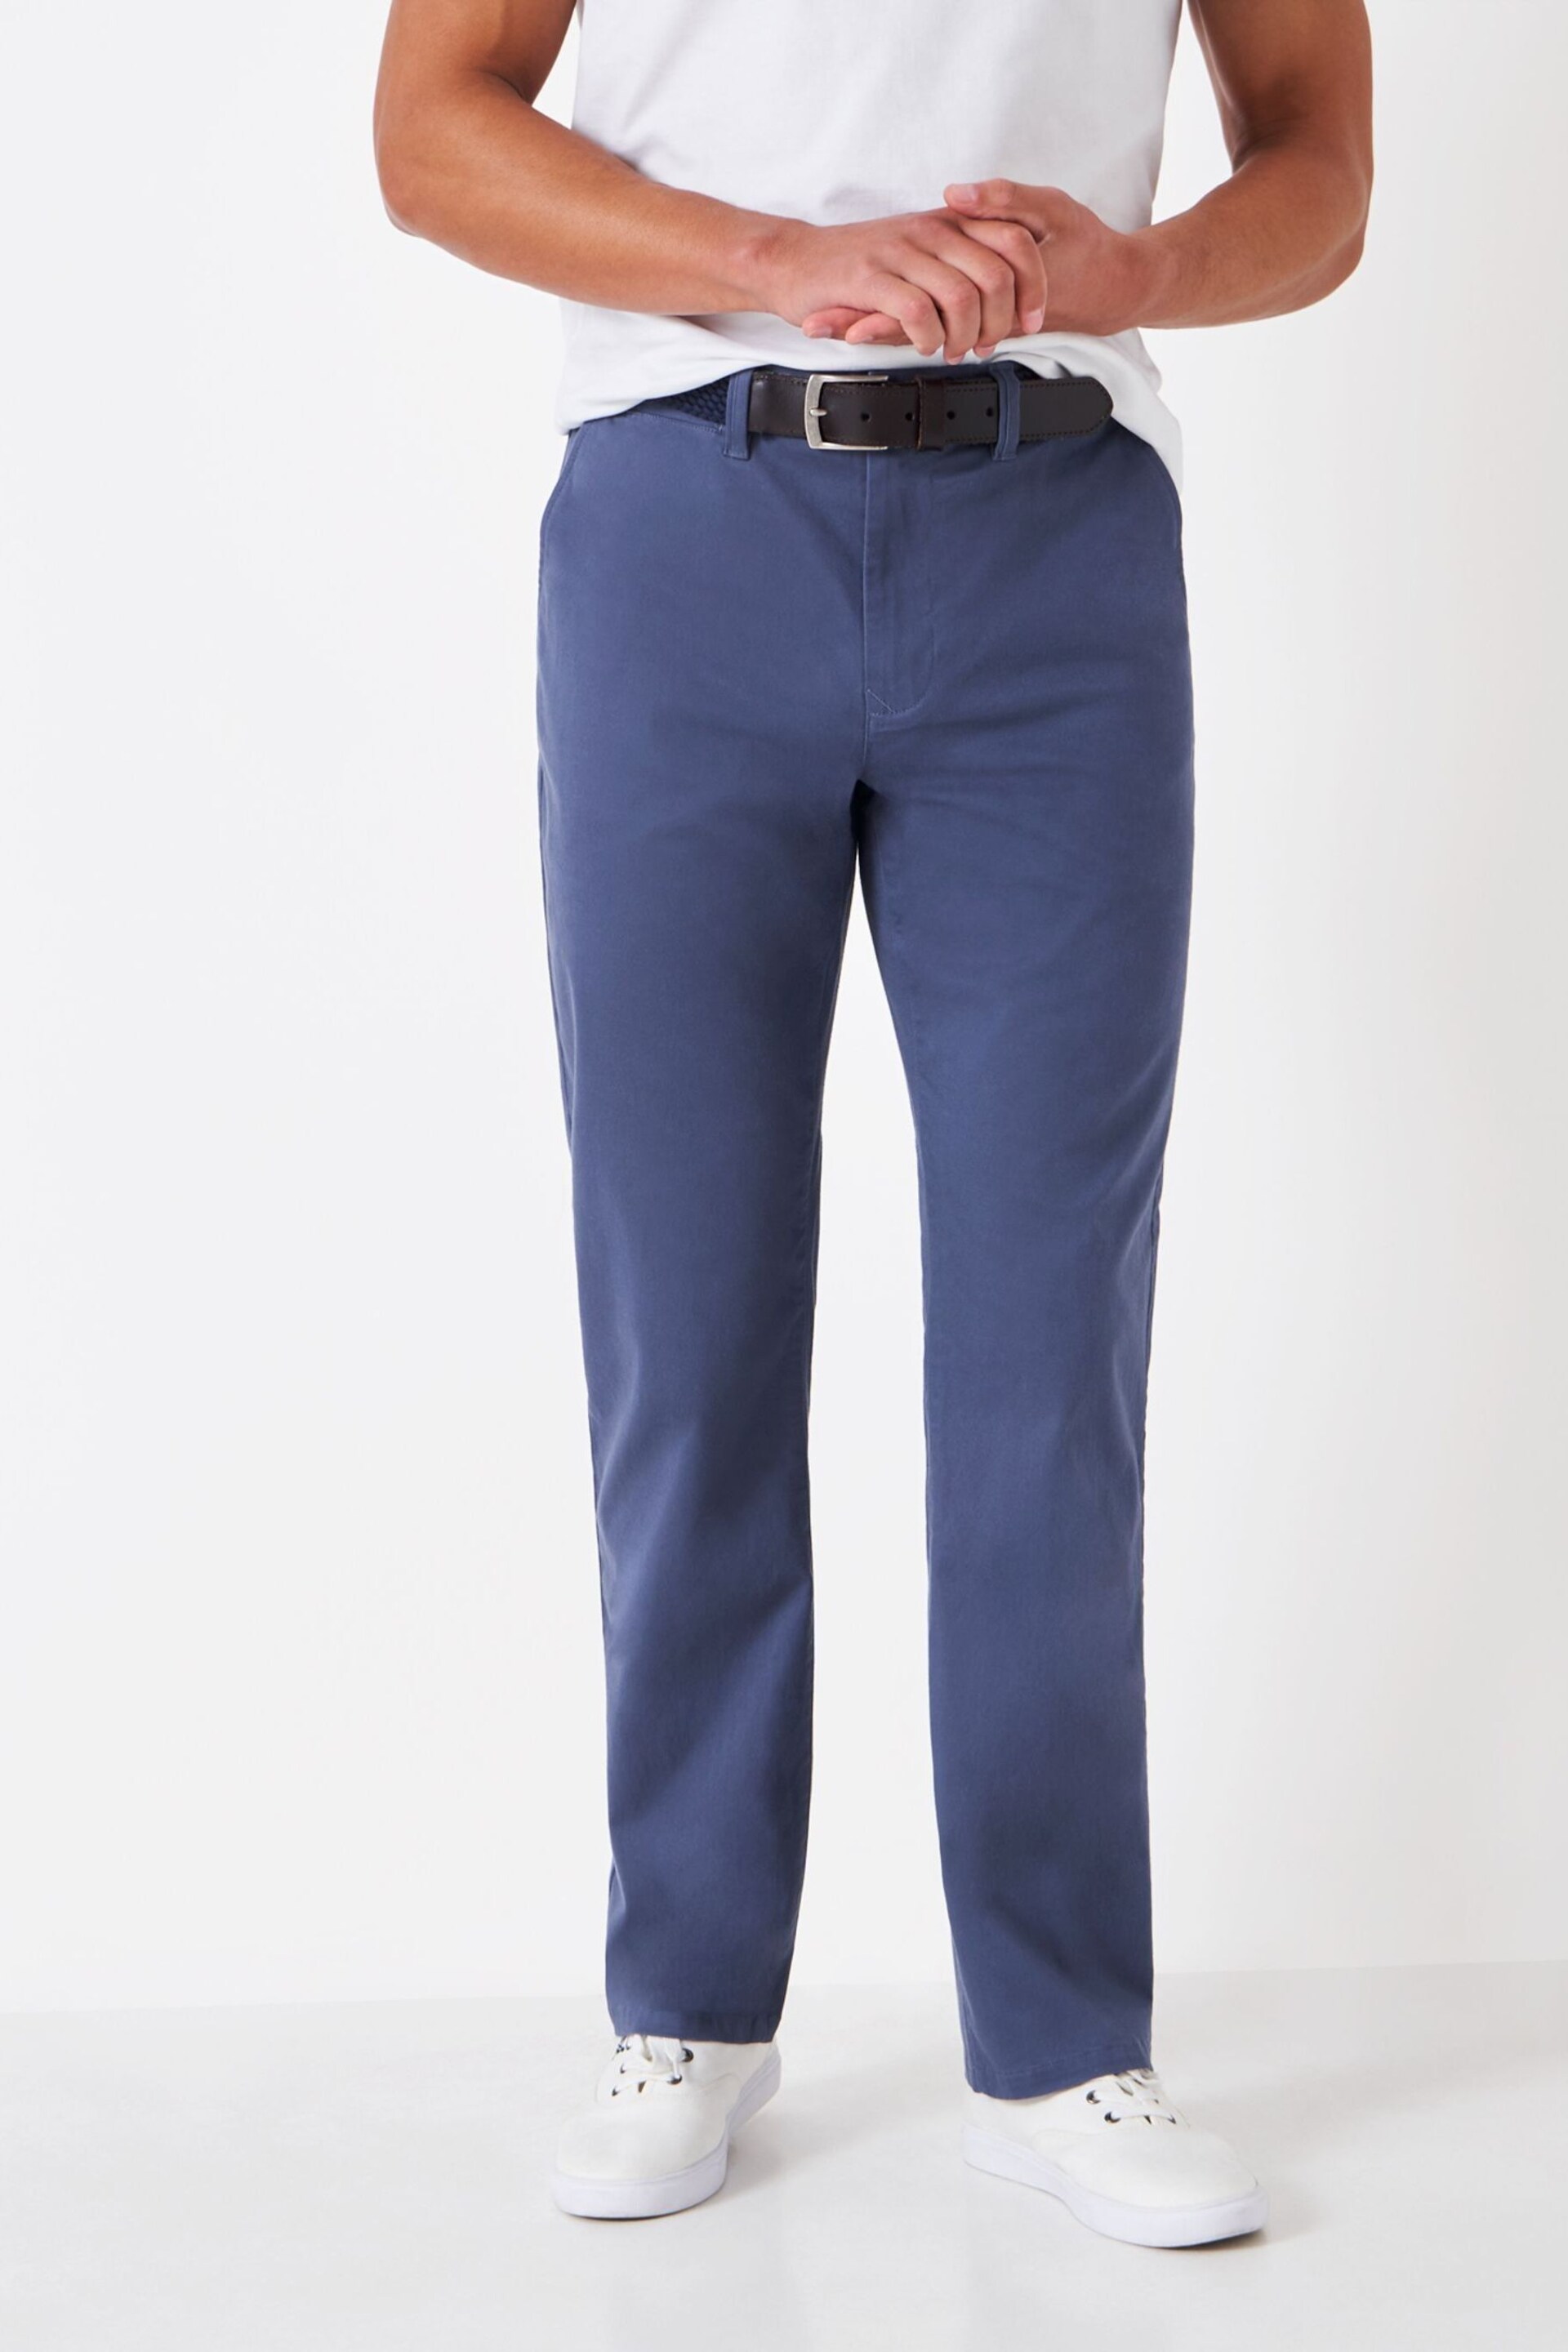 Crew Clothing Company Grey Cotton Trouser - Image 1 of 5